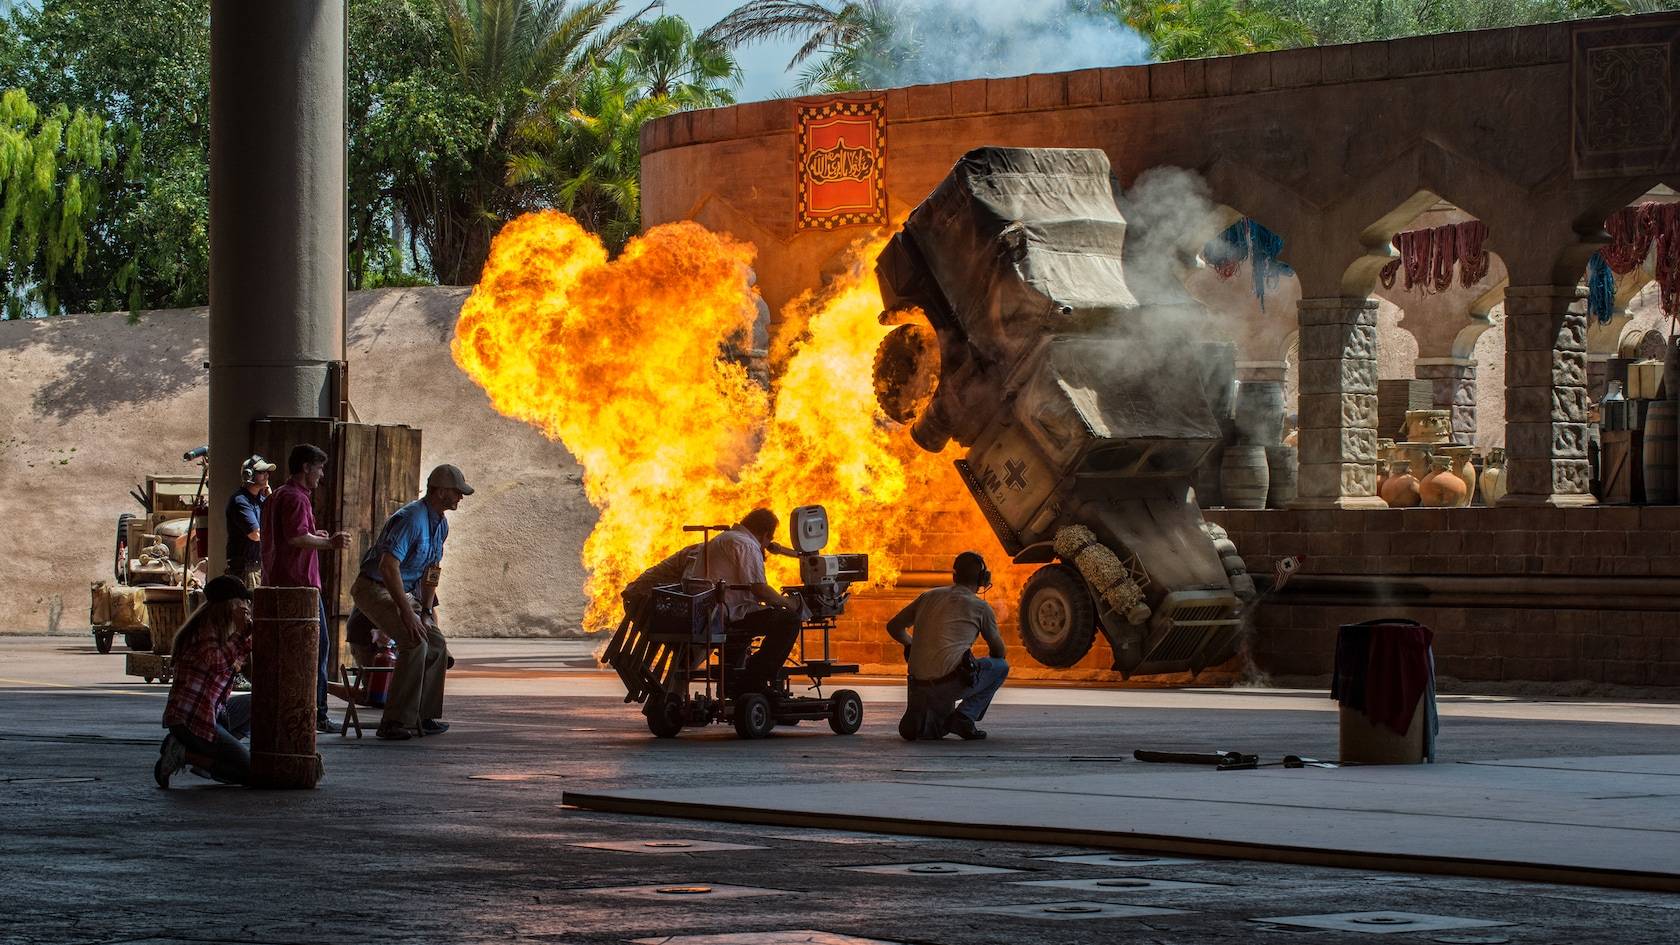 A look ahead at the reopening of the Indiana Jones Epic Stunt Spectacular in Disney's Hollywood Studios